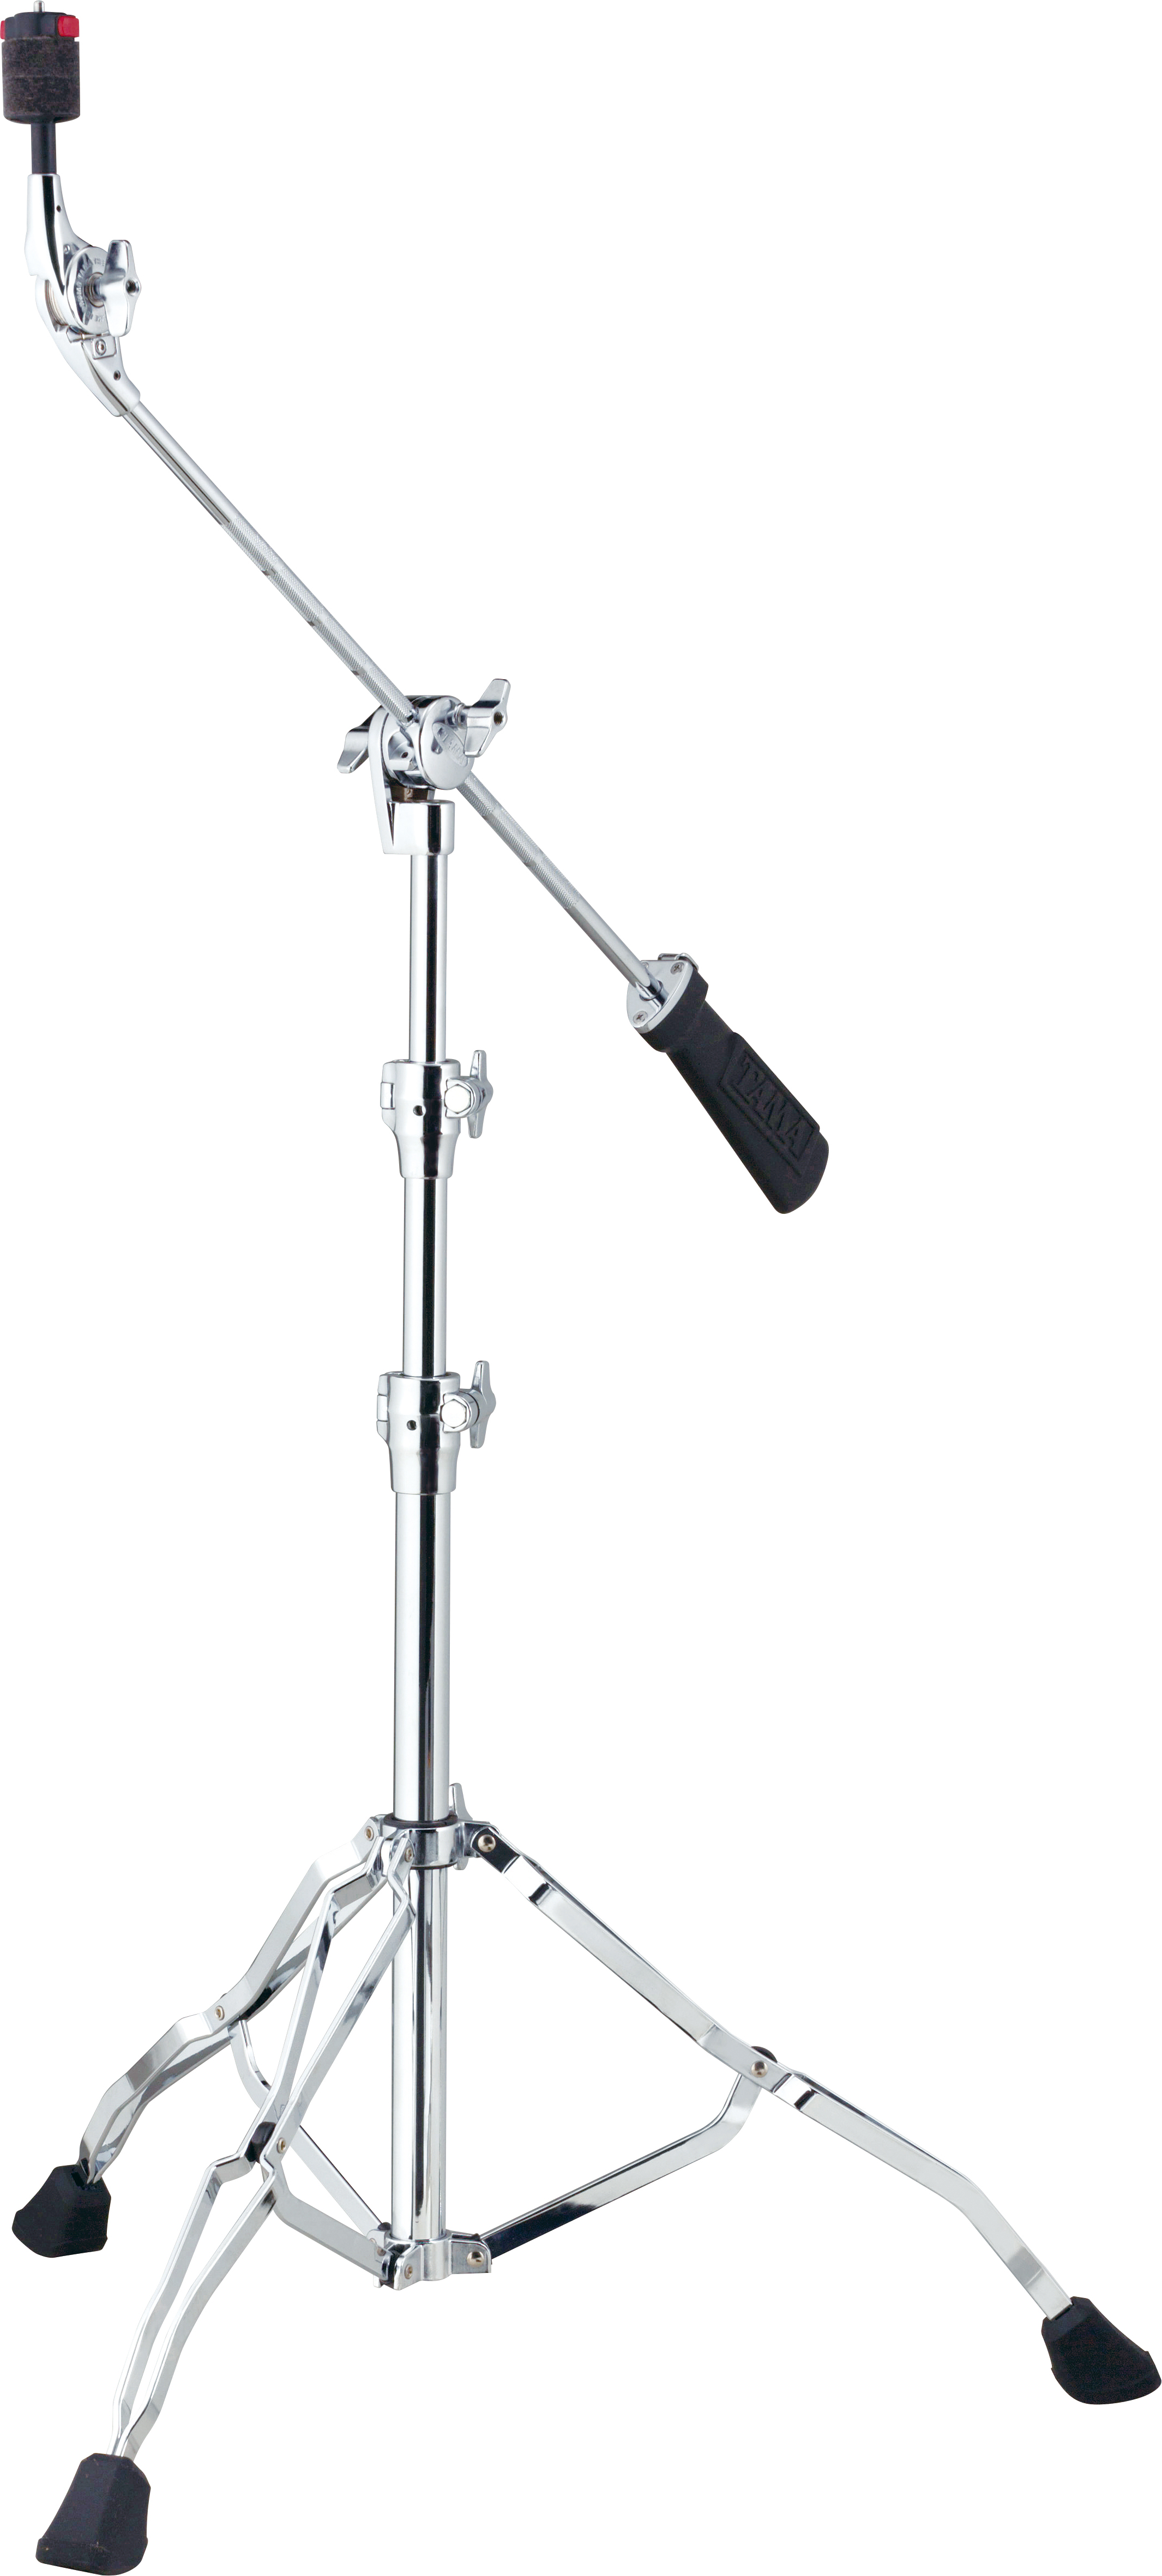 Tama Hc84bw Tam Boom Cymbal Stand W/weight - Pied De Cymbale - Main picture